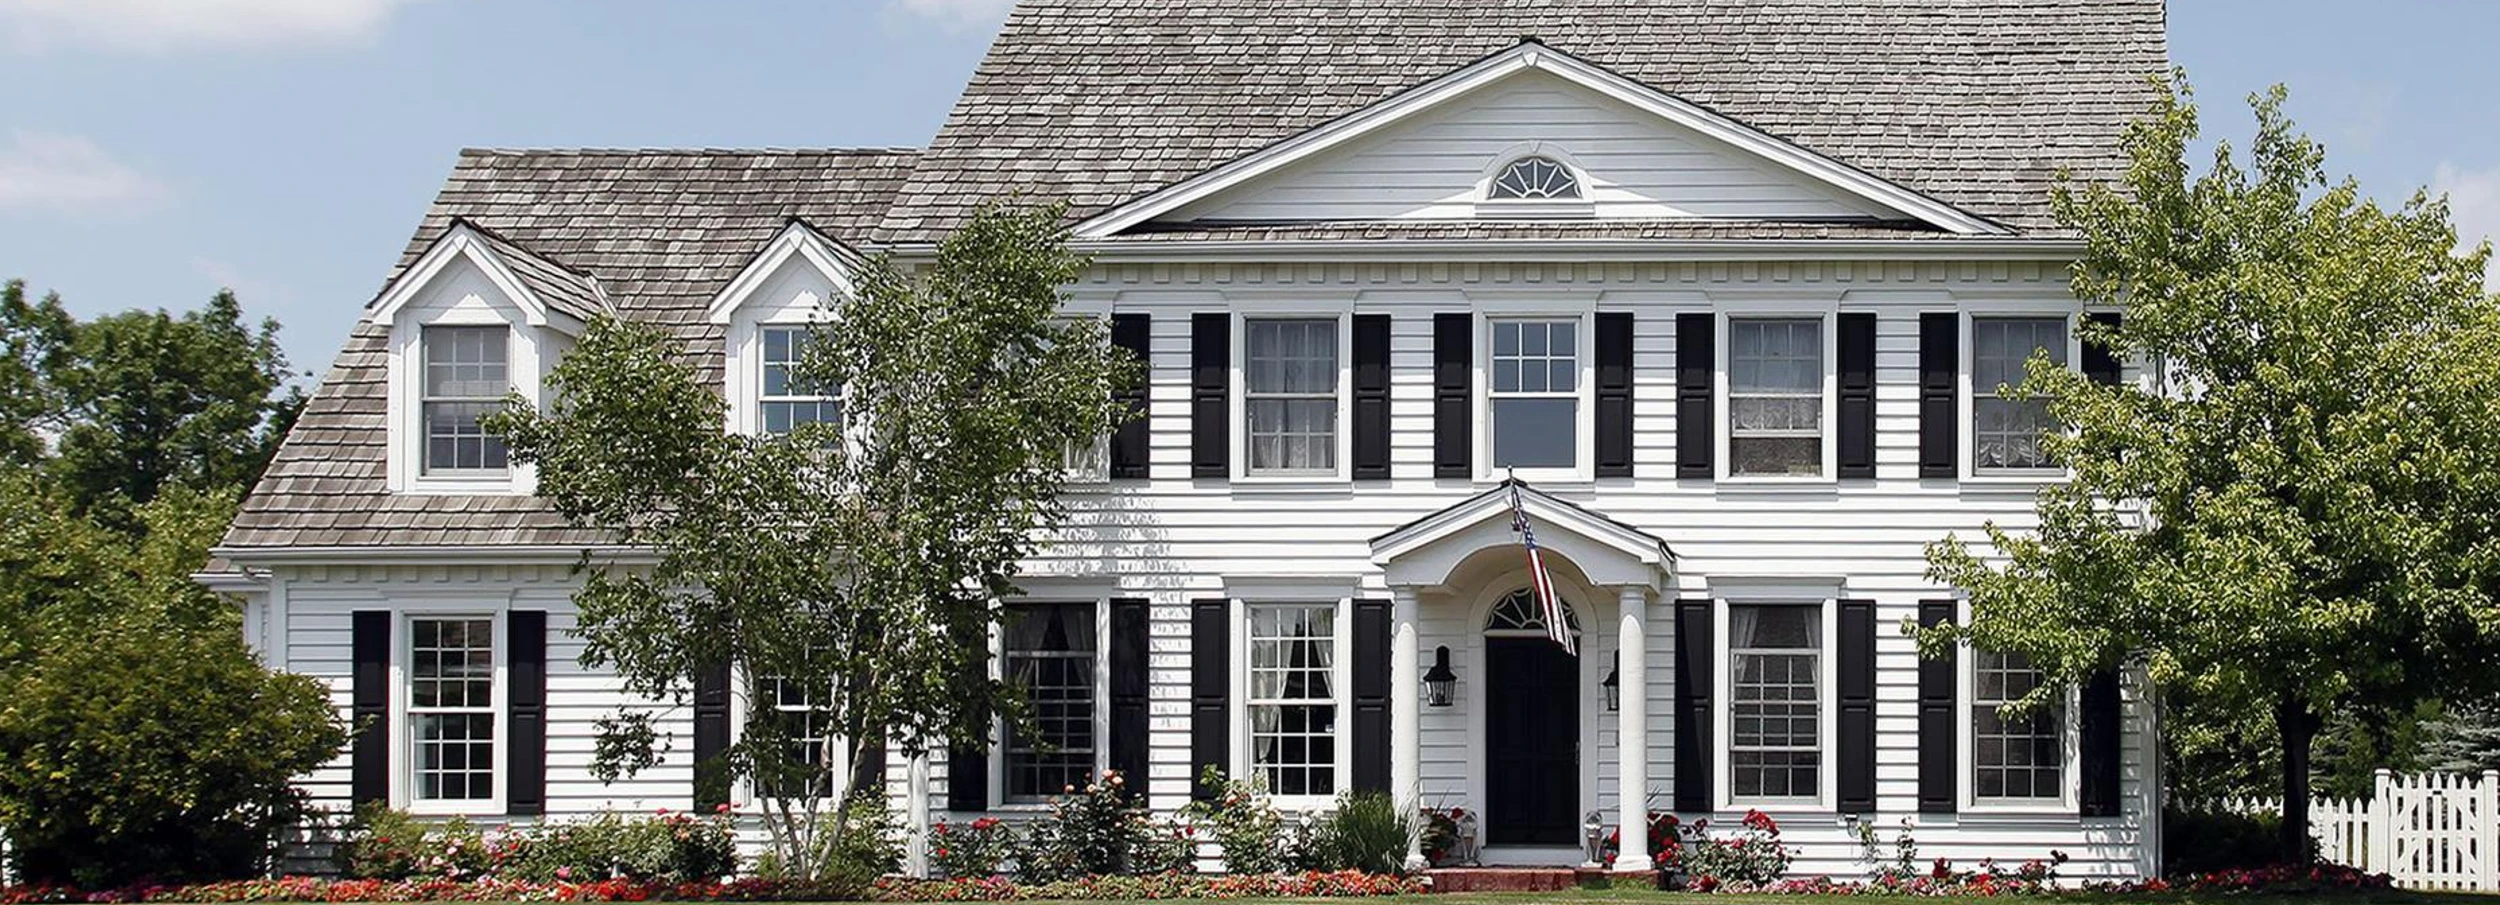 Large white house with white picket fence and landscaping